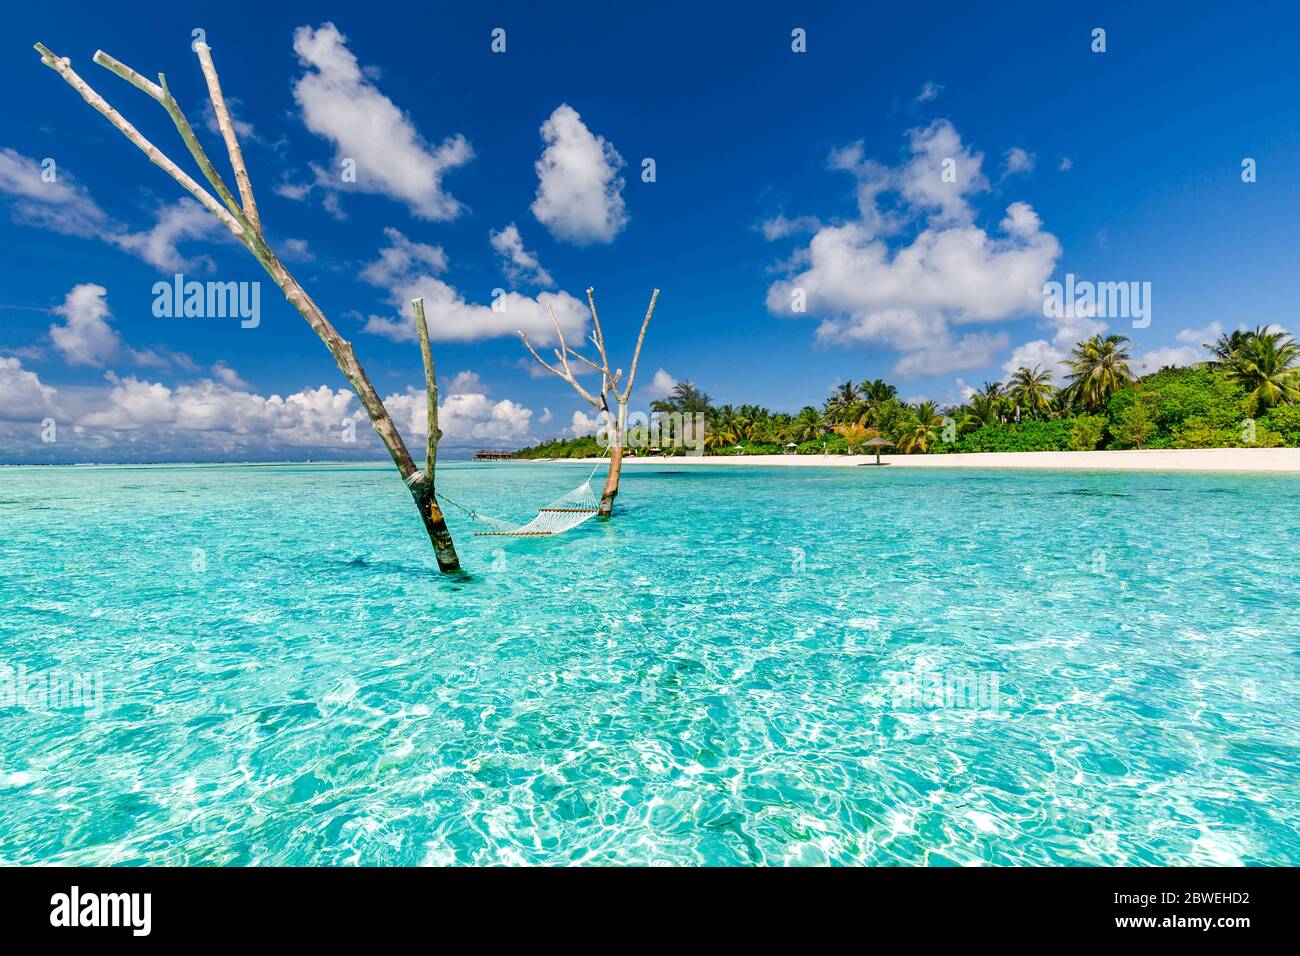 Luxury water hammock in paradise island sea lagoon. Summer beach travel and exotic vacation destination. Inspirational tropical beach travel landscape Stock Photo